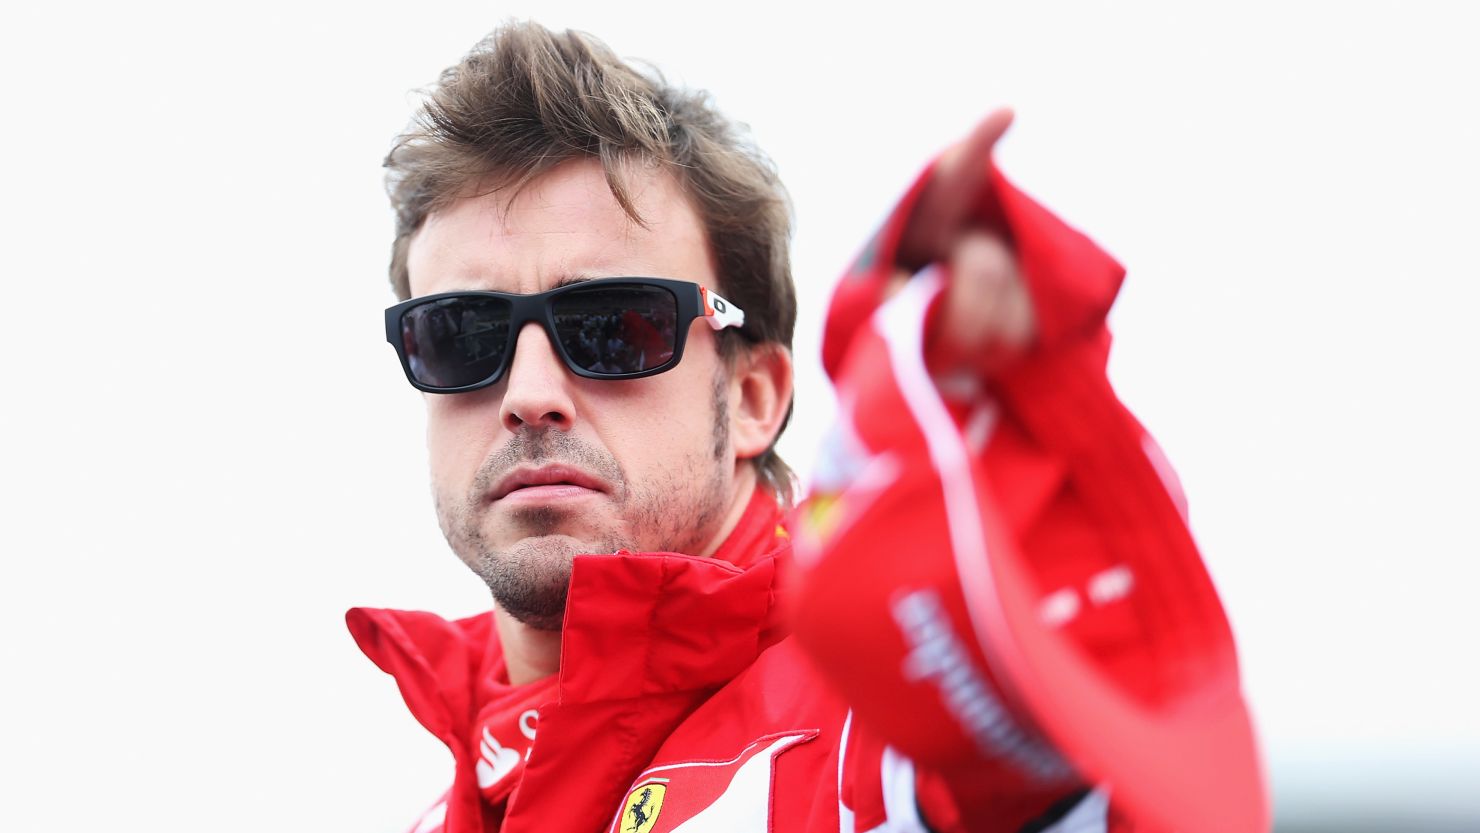 Fernando Alonso is hoping to stop Red Bull's Sebastian Vettel from winning a fourth straight drivers' title.
